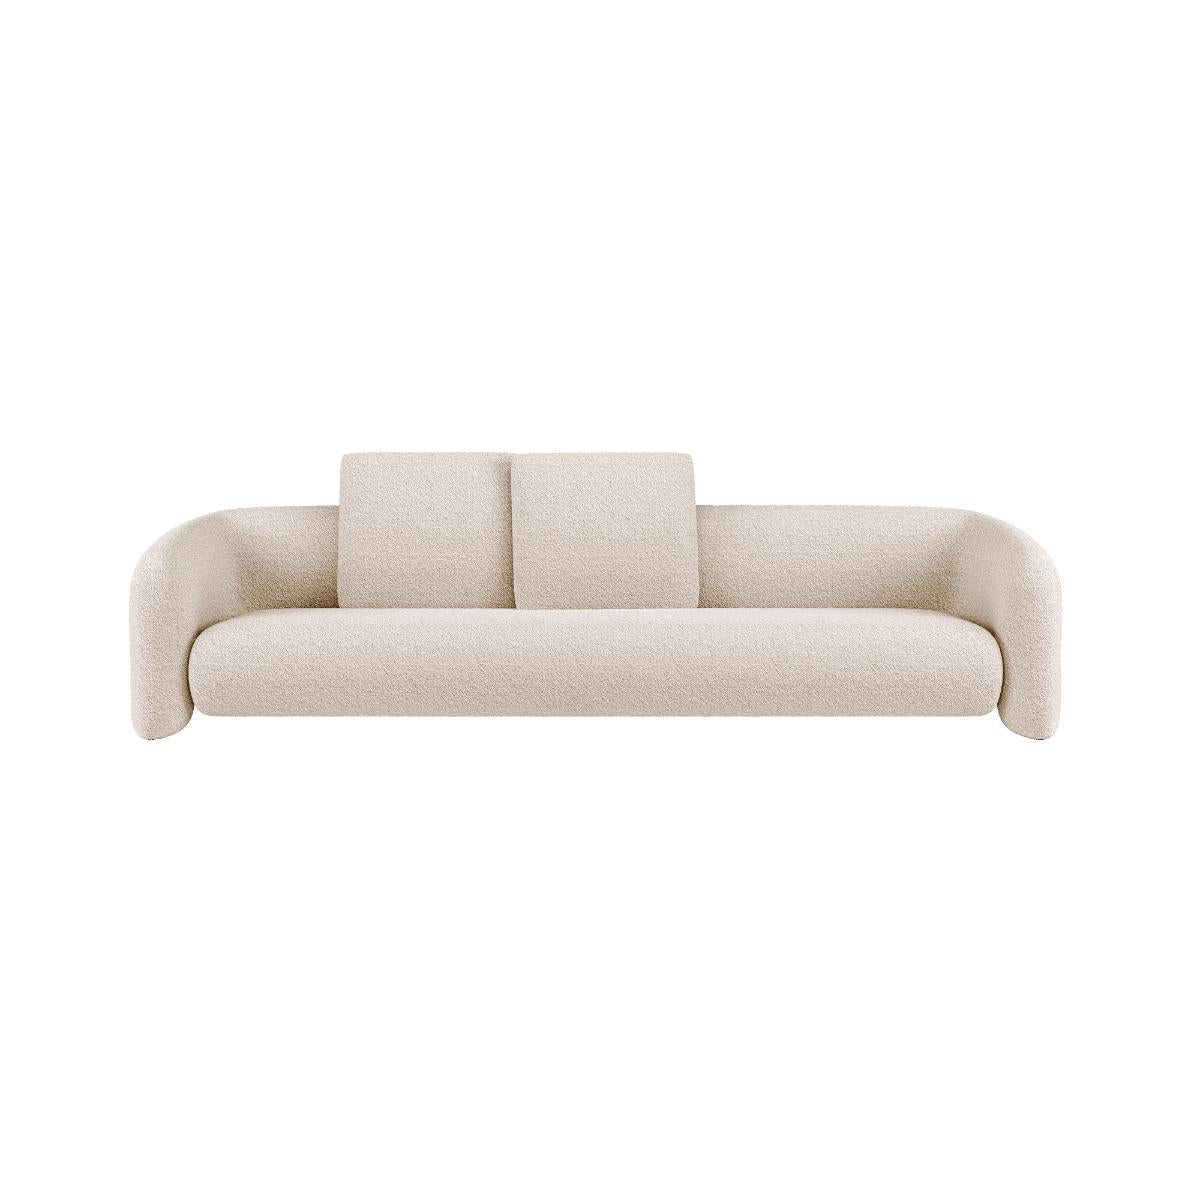 Bold Sofa by Mohdern
Dimensions: W 268 x D 102 x H 76 cm
Materials: Fabric, Bouclé


Bold is a refined furniture collection designed and produced by the Mohdern brand. The series includes the armchair and lounge chair; the sofa in different designs;